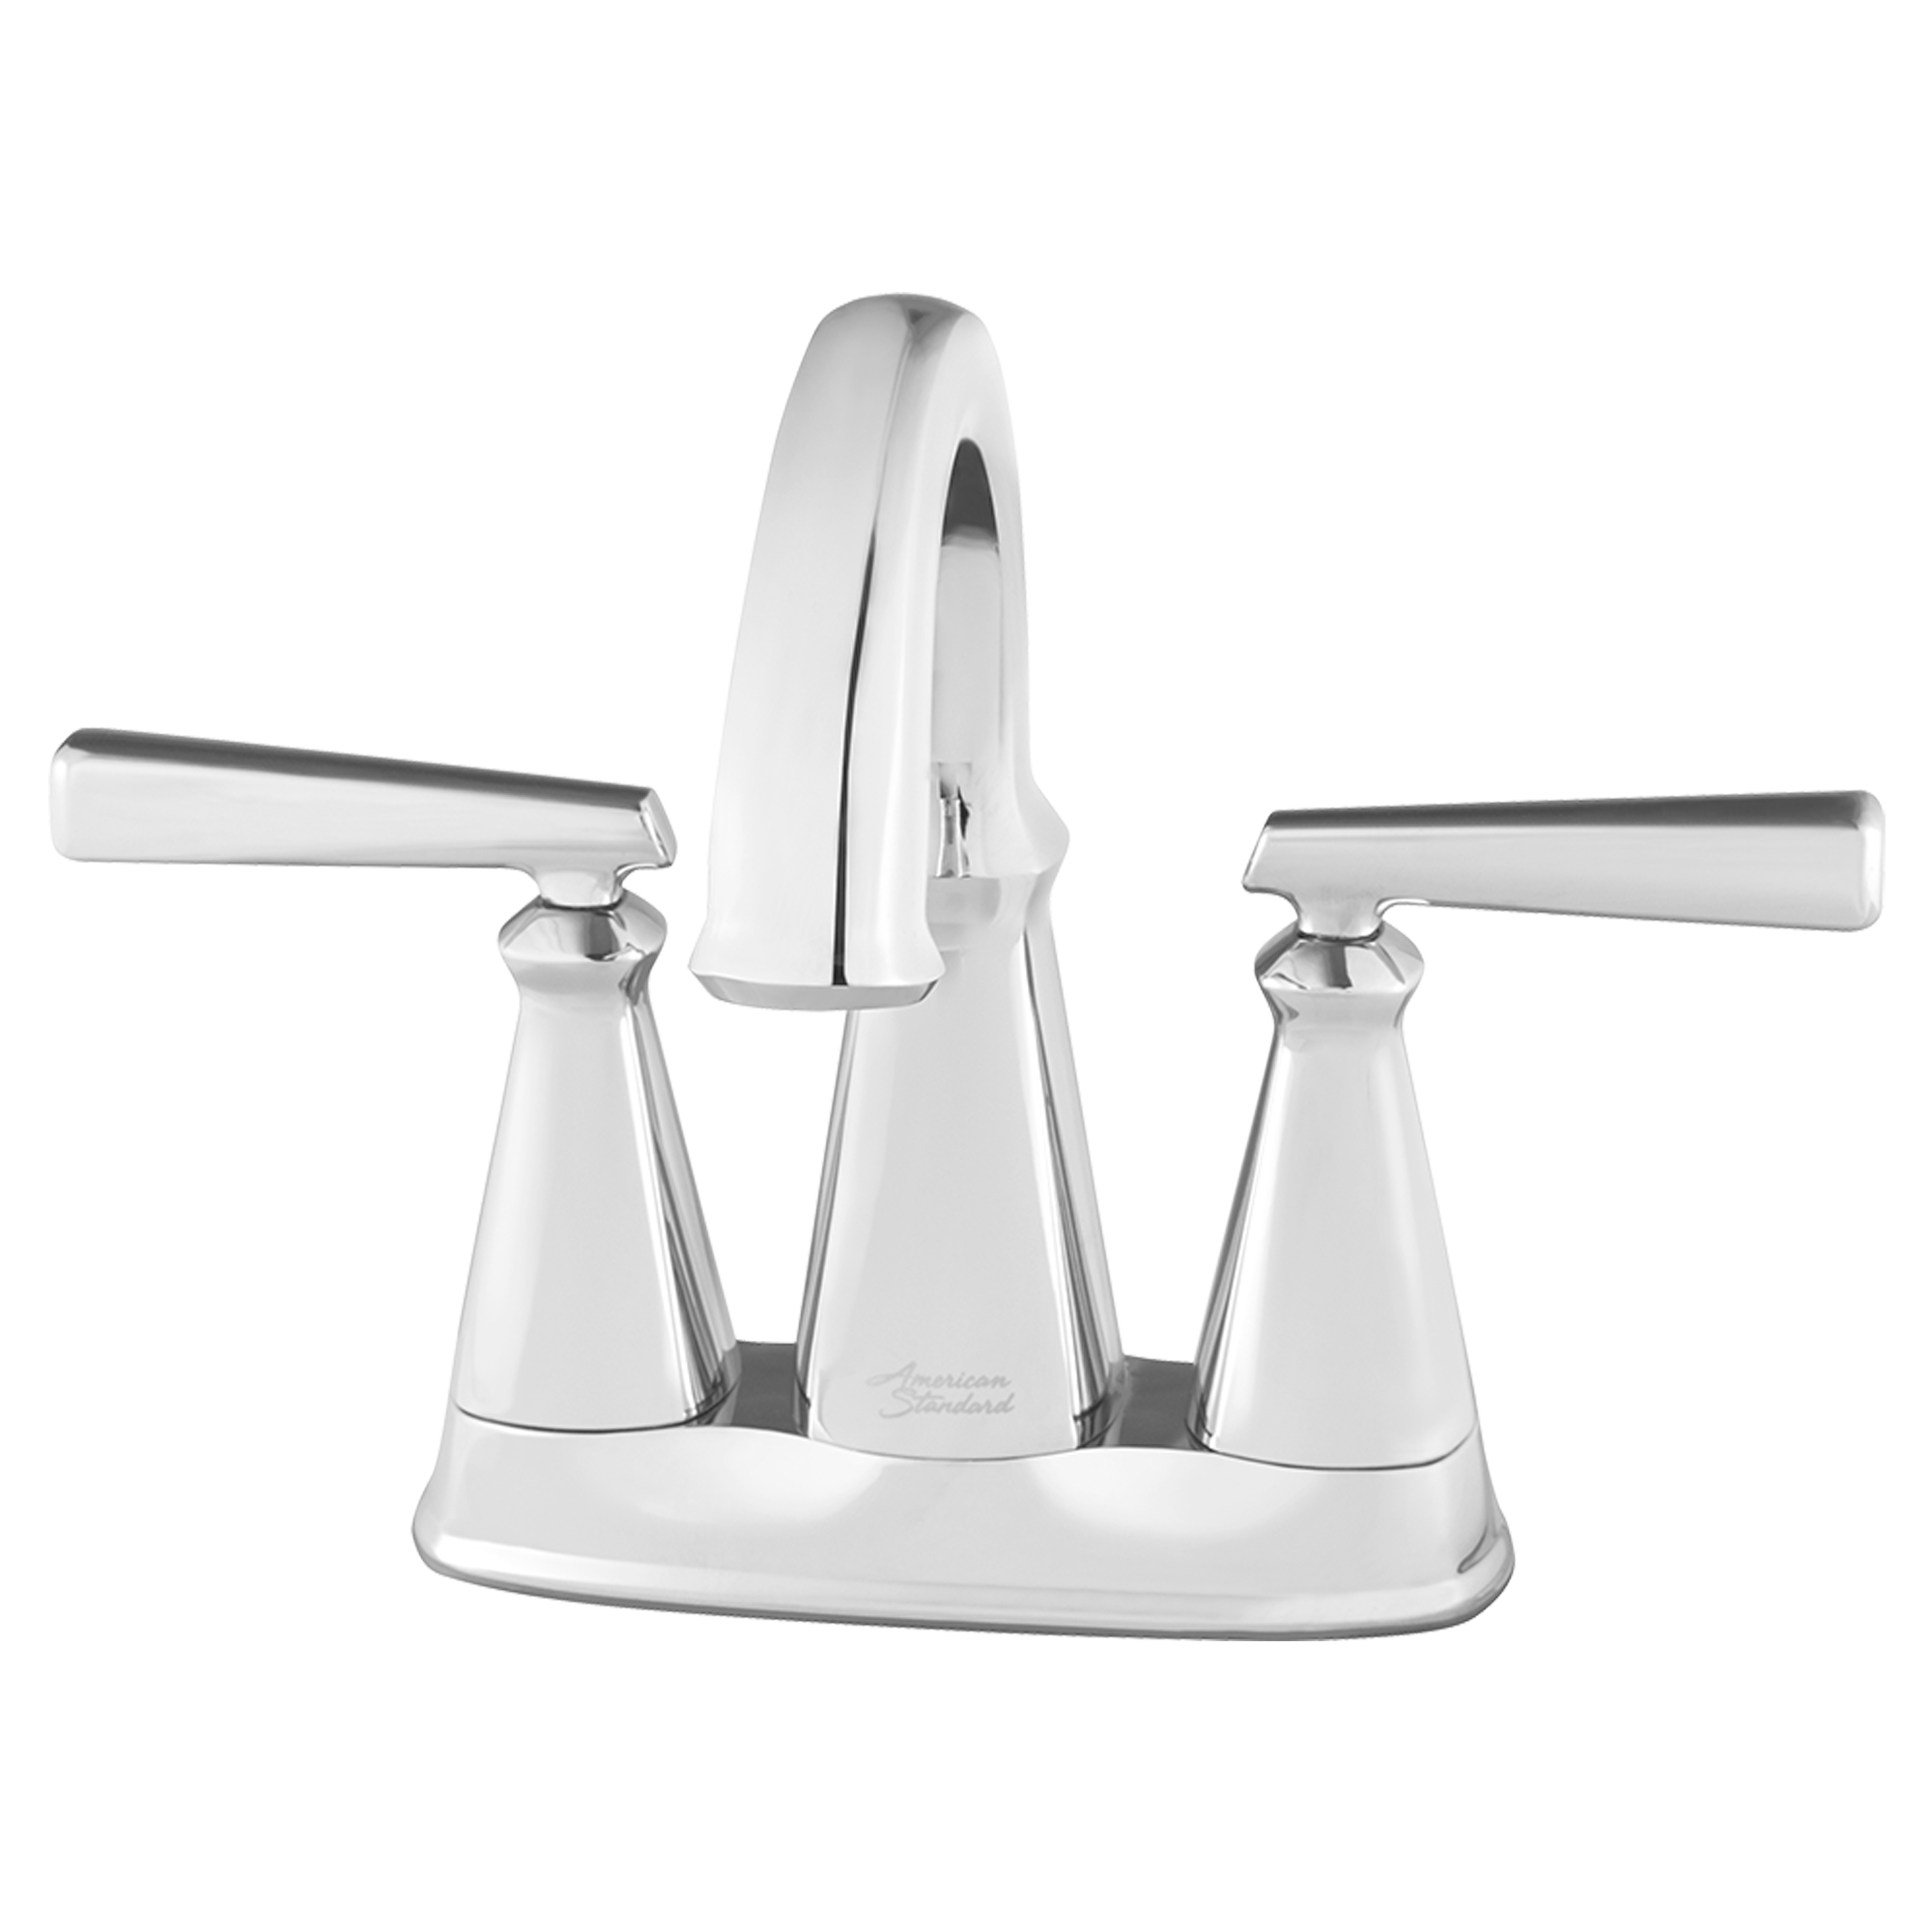 Edgemere Centerset Lav Faucet 2-Handles In Polished Chrome